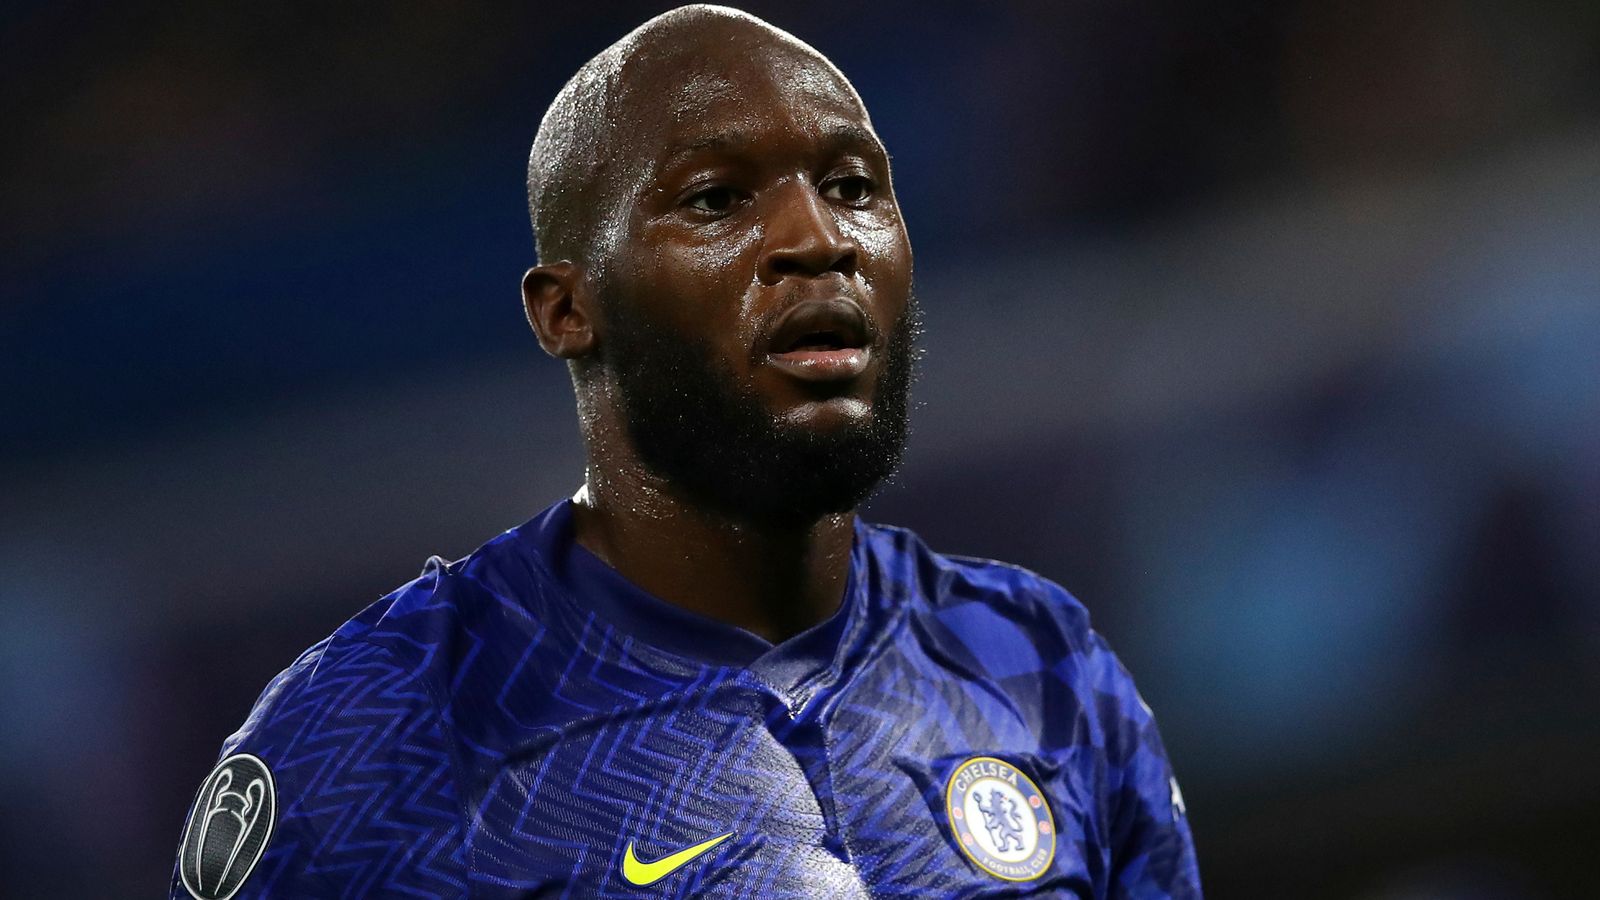 Romelu Lukaku was 'not happy with situation' at Chelsea